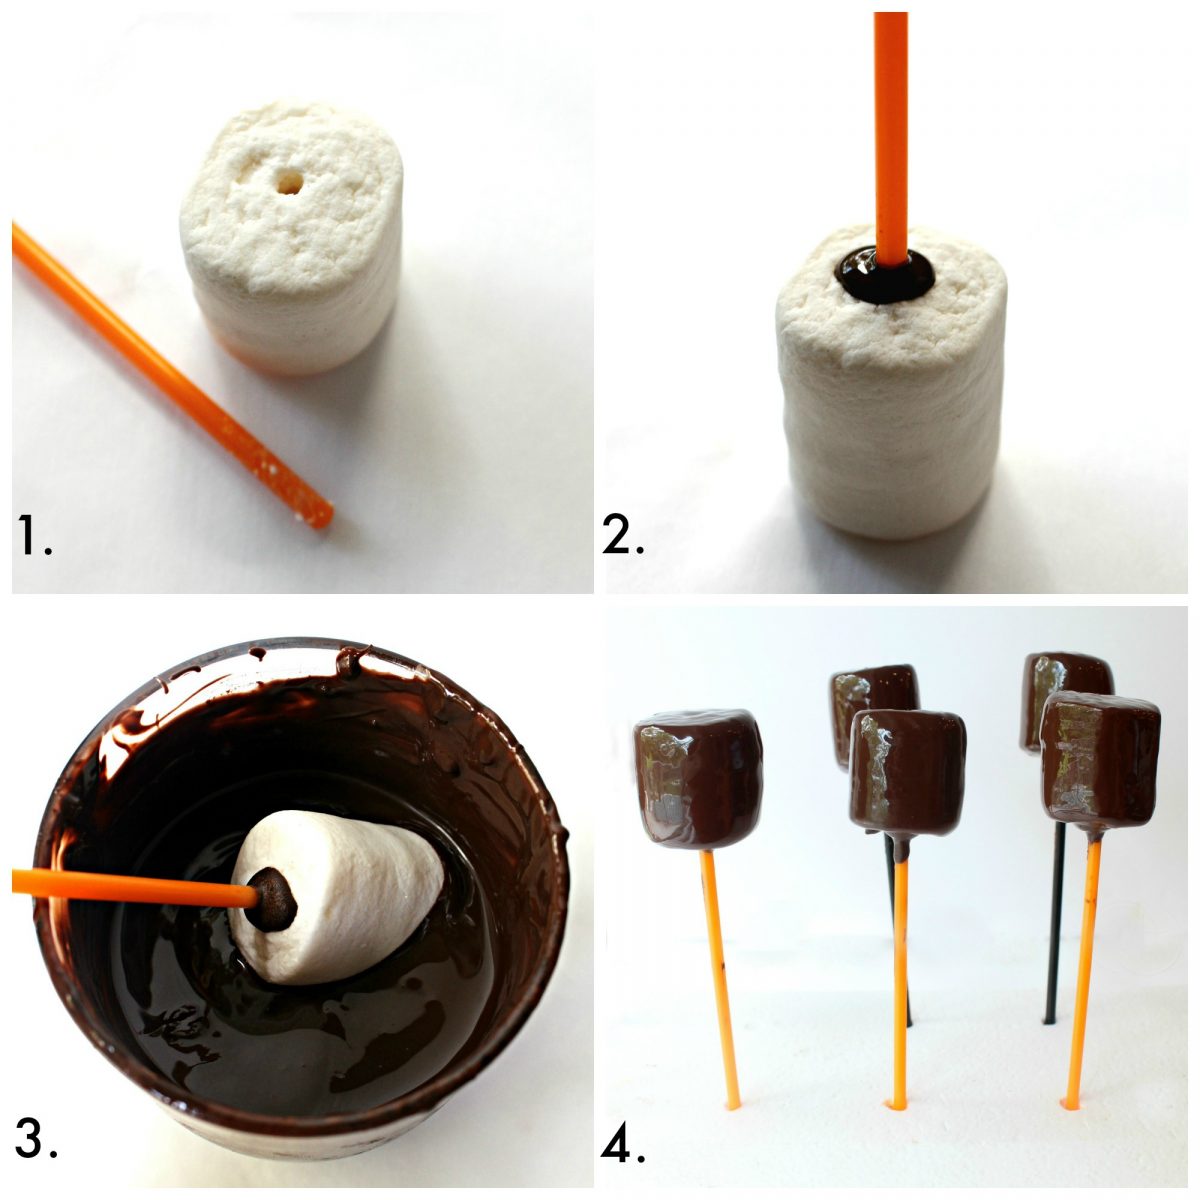 Instruction; make hole on marshmallow end, attach stick with chocolate, chocolate coat, allow chocolate to firm.